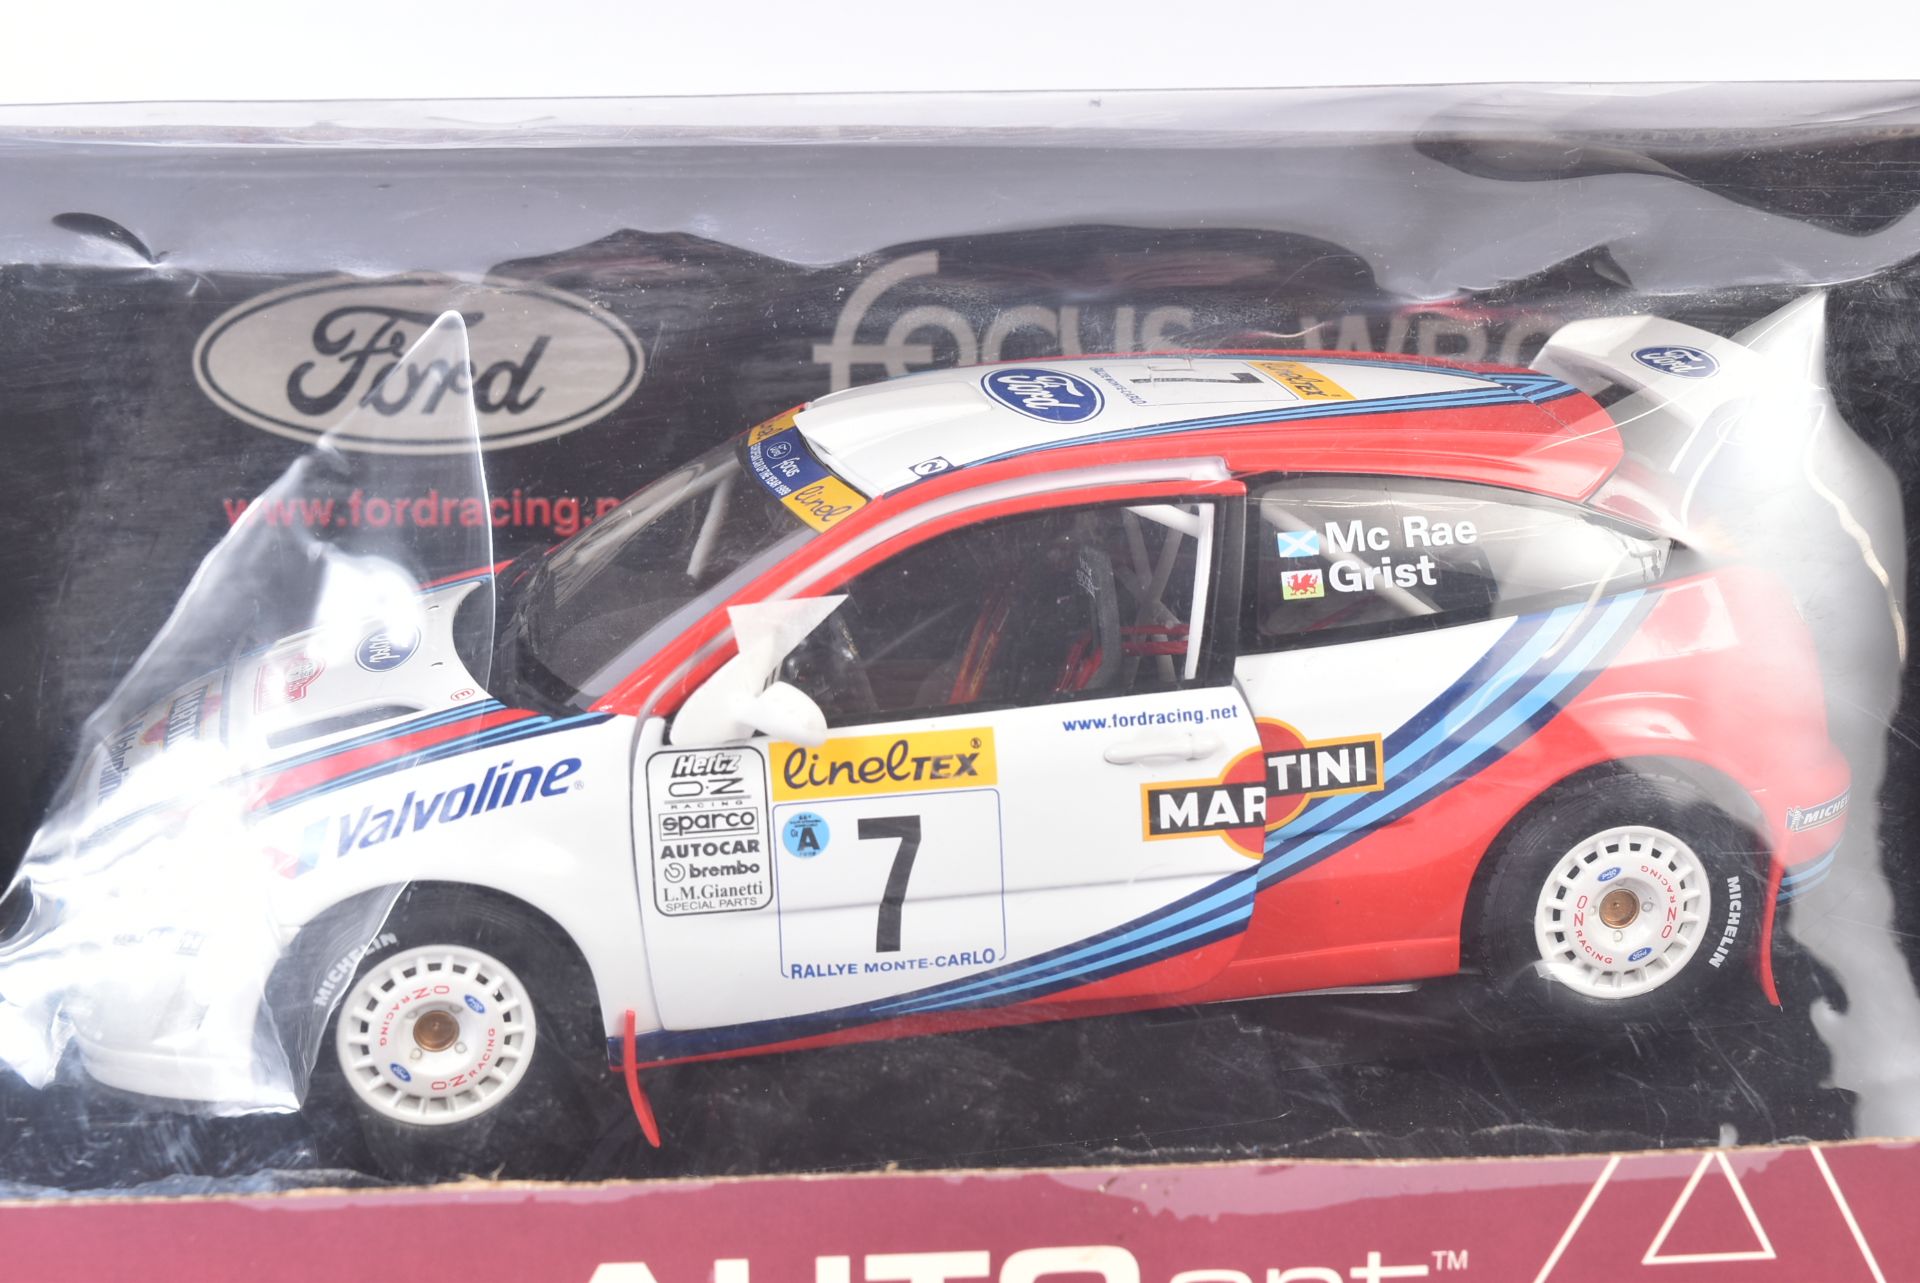 AUTO ART 1/18 SCALE DIECAST FORD FOCUS WRC - Image 2 of 4